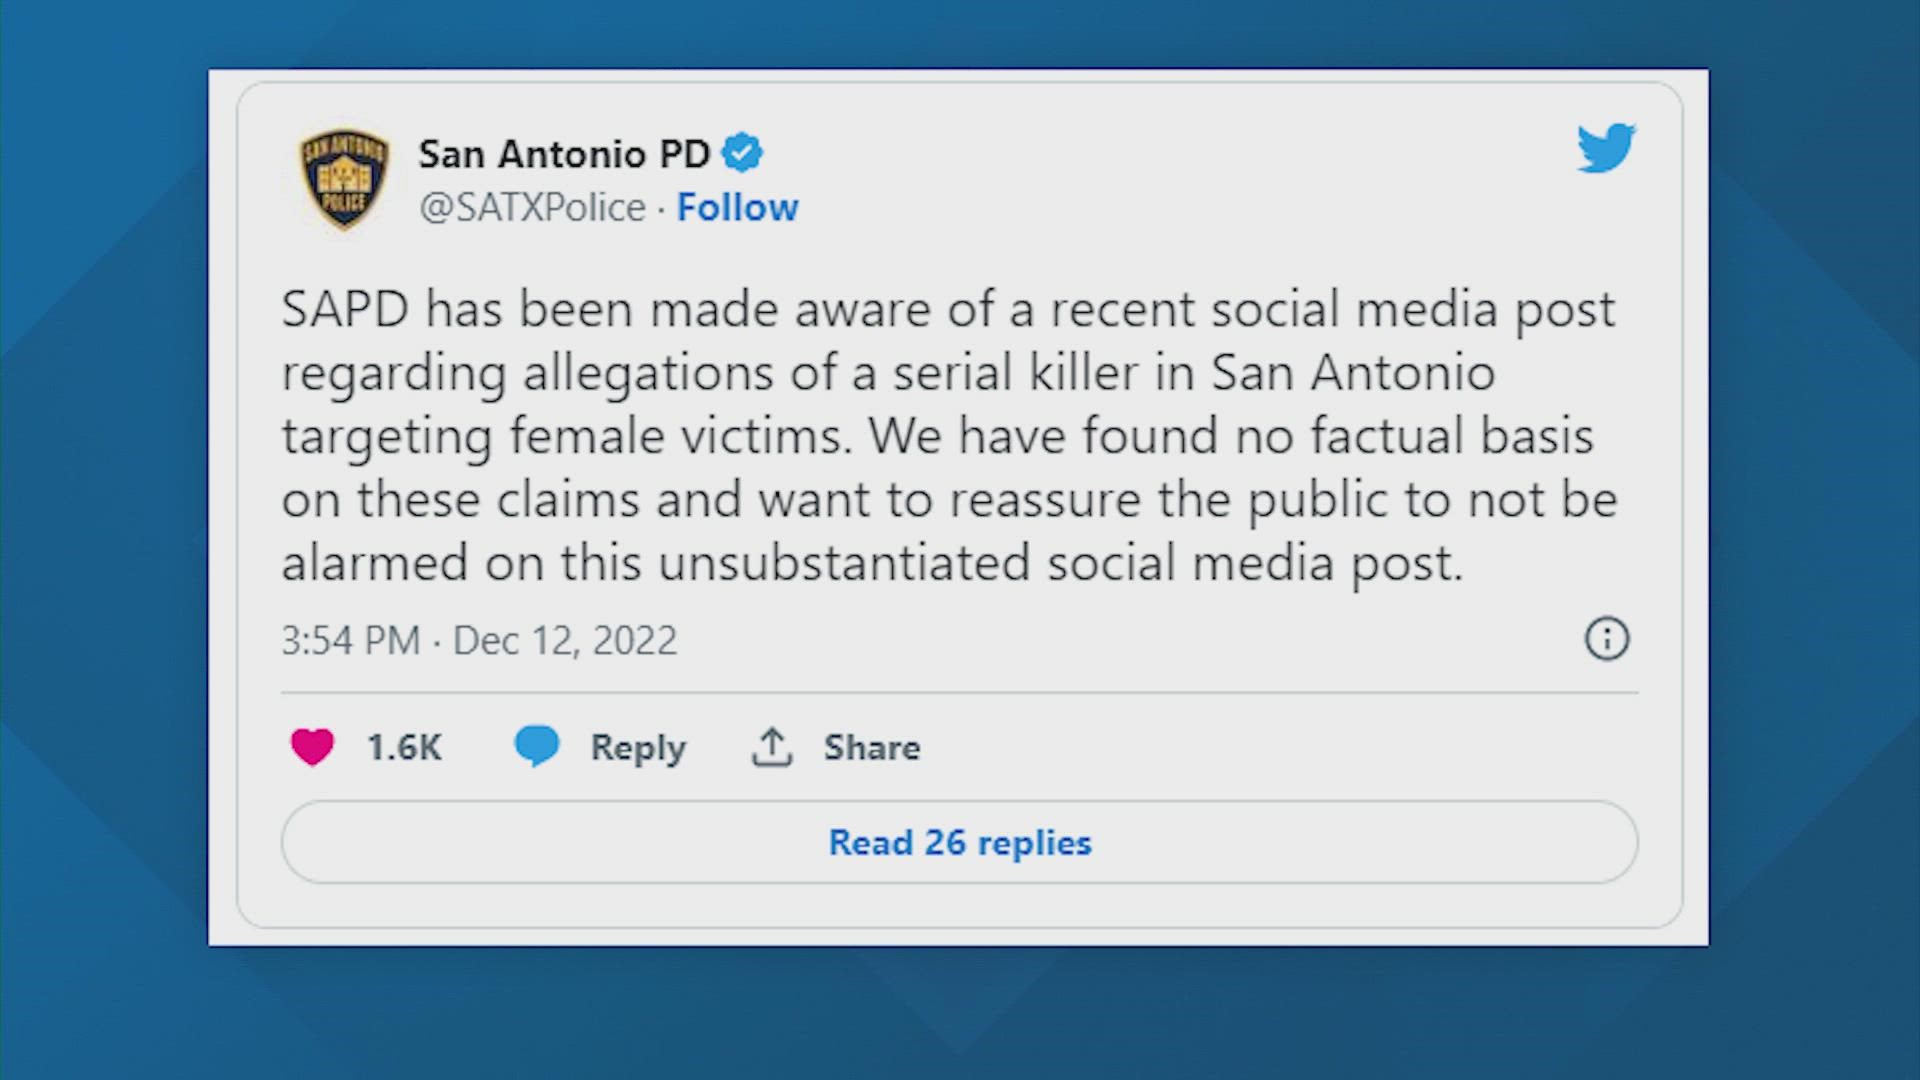 Posts being shared on Facebook and Twitter say a killer is targeting young women and has killed nine. Police say they've found "no factual basis" for those claims.